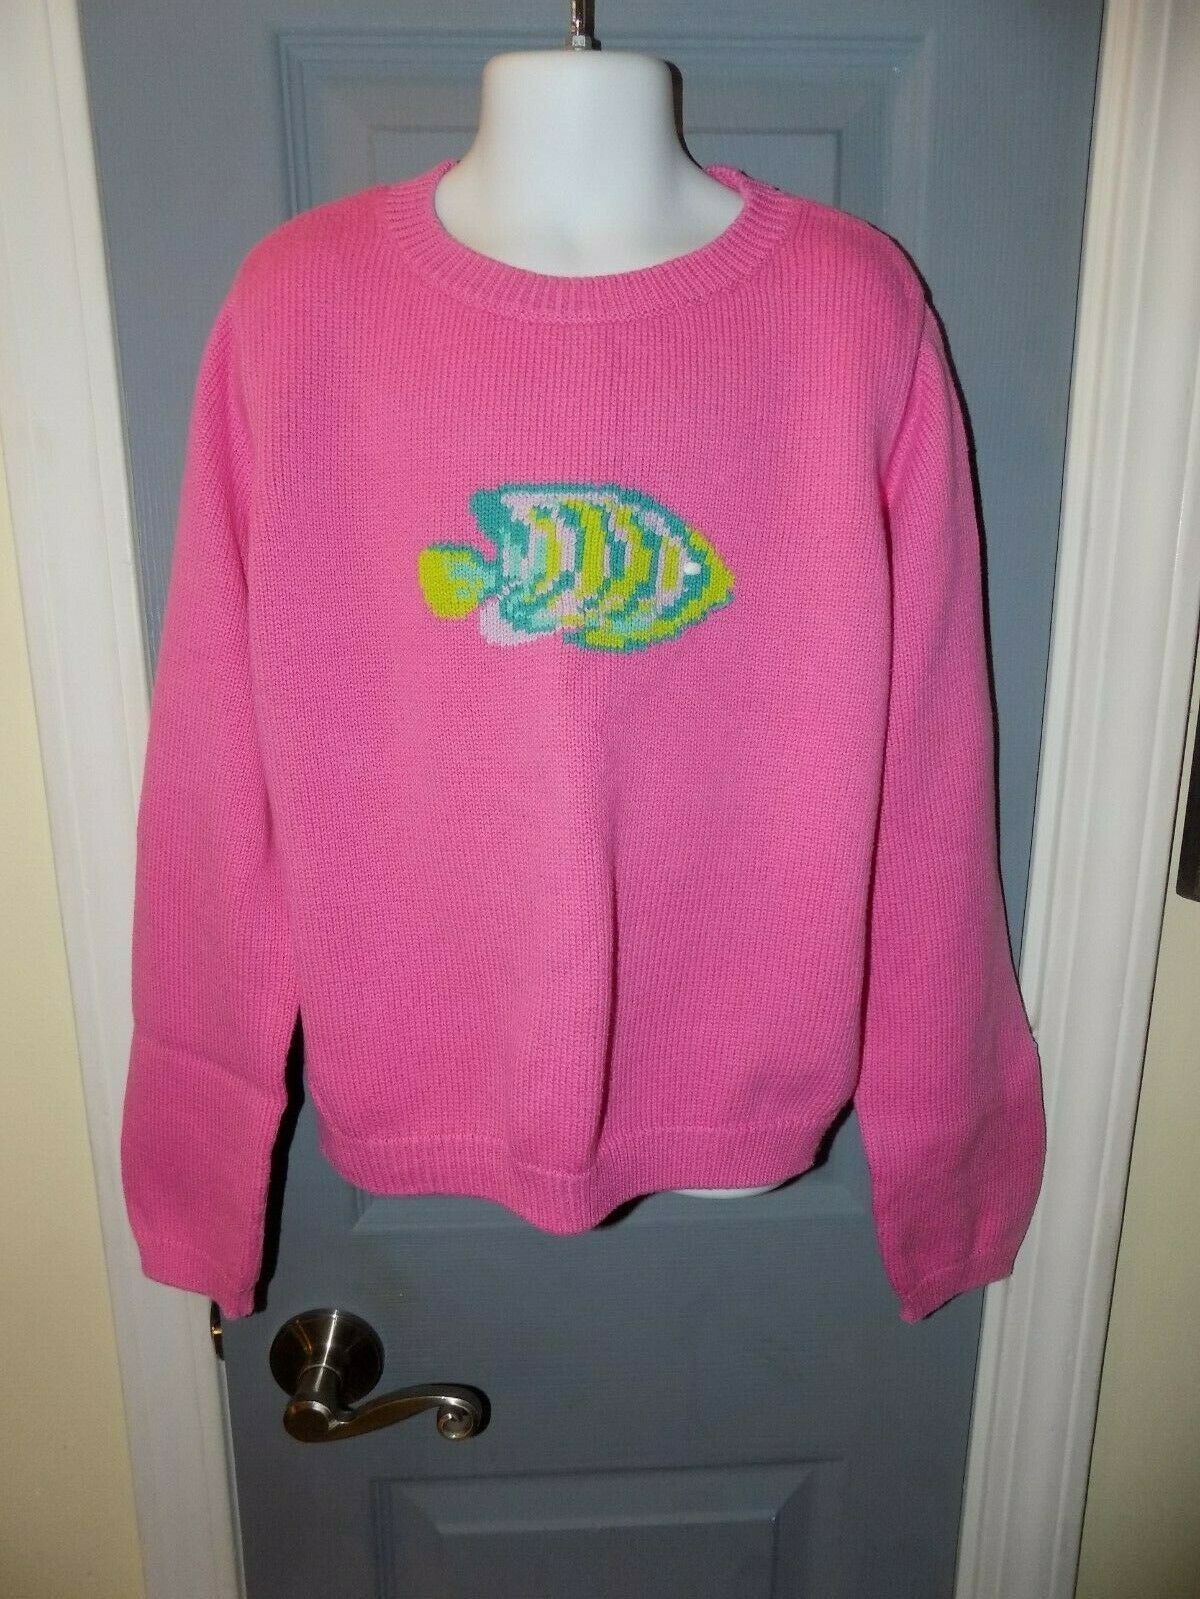 Primary image for Lilly Pulitzer Fish Pink Pullover Sweater Size 10 Girl's White Label HTF RARE